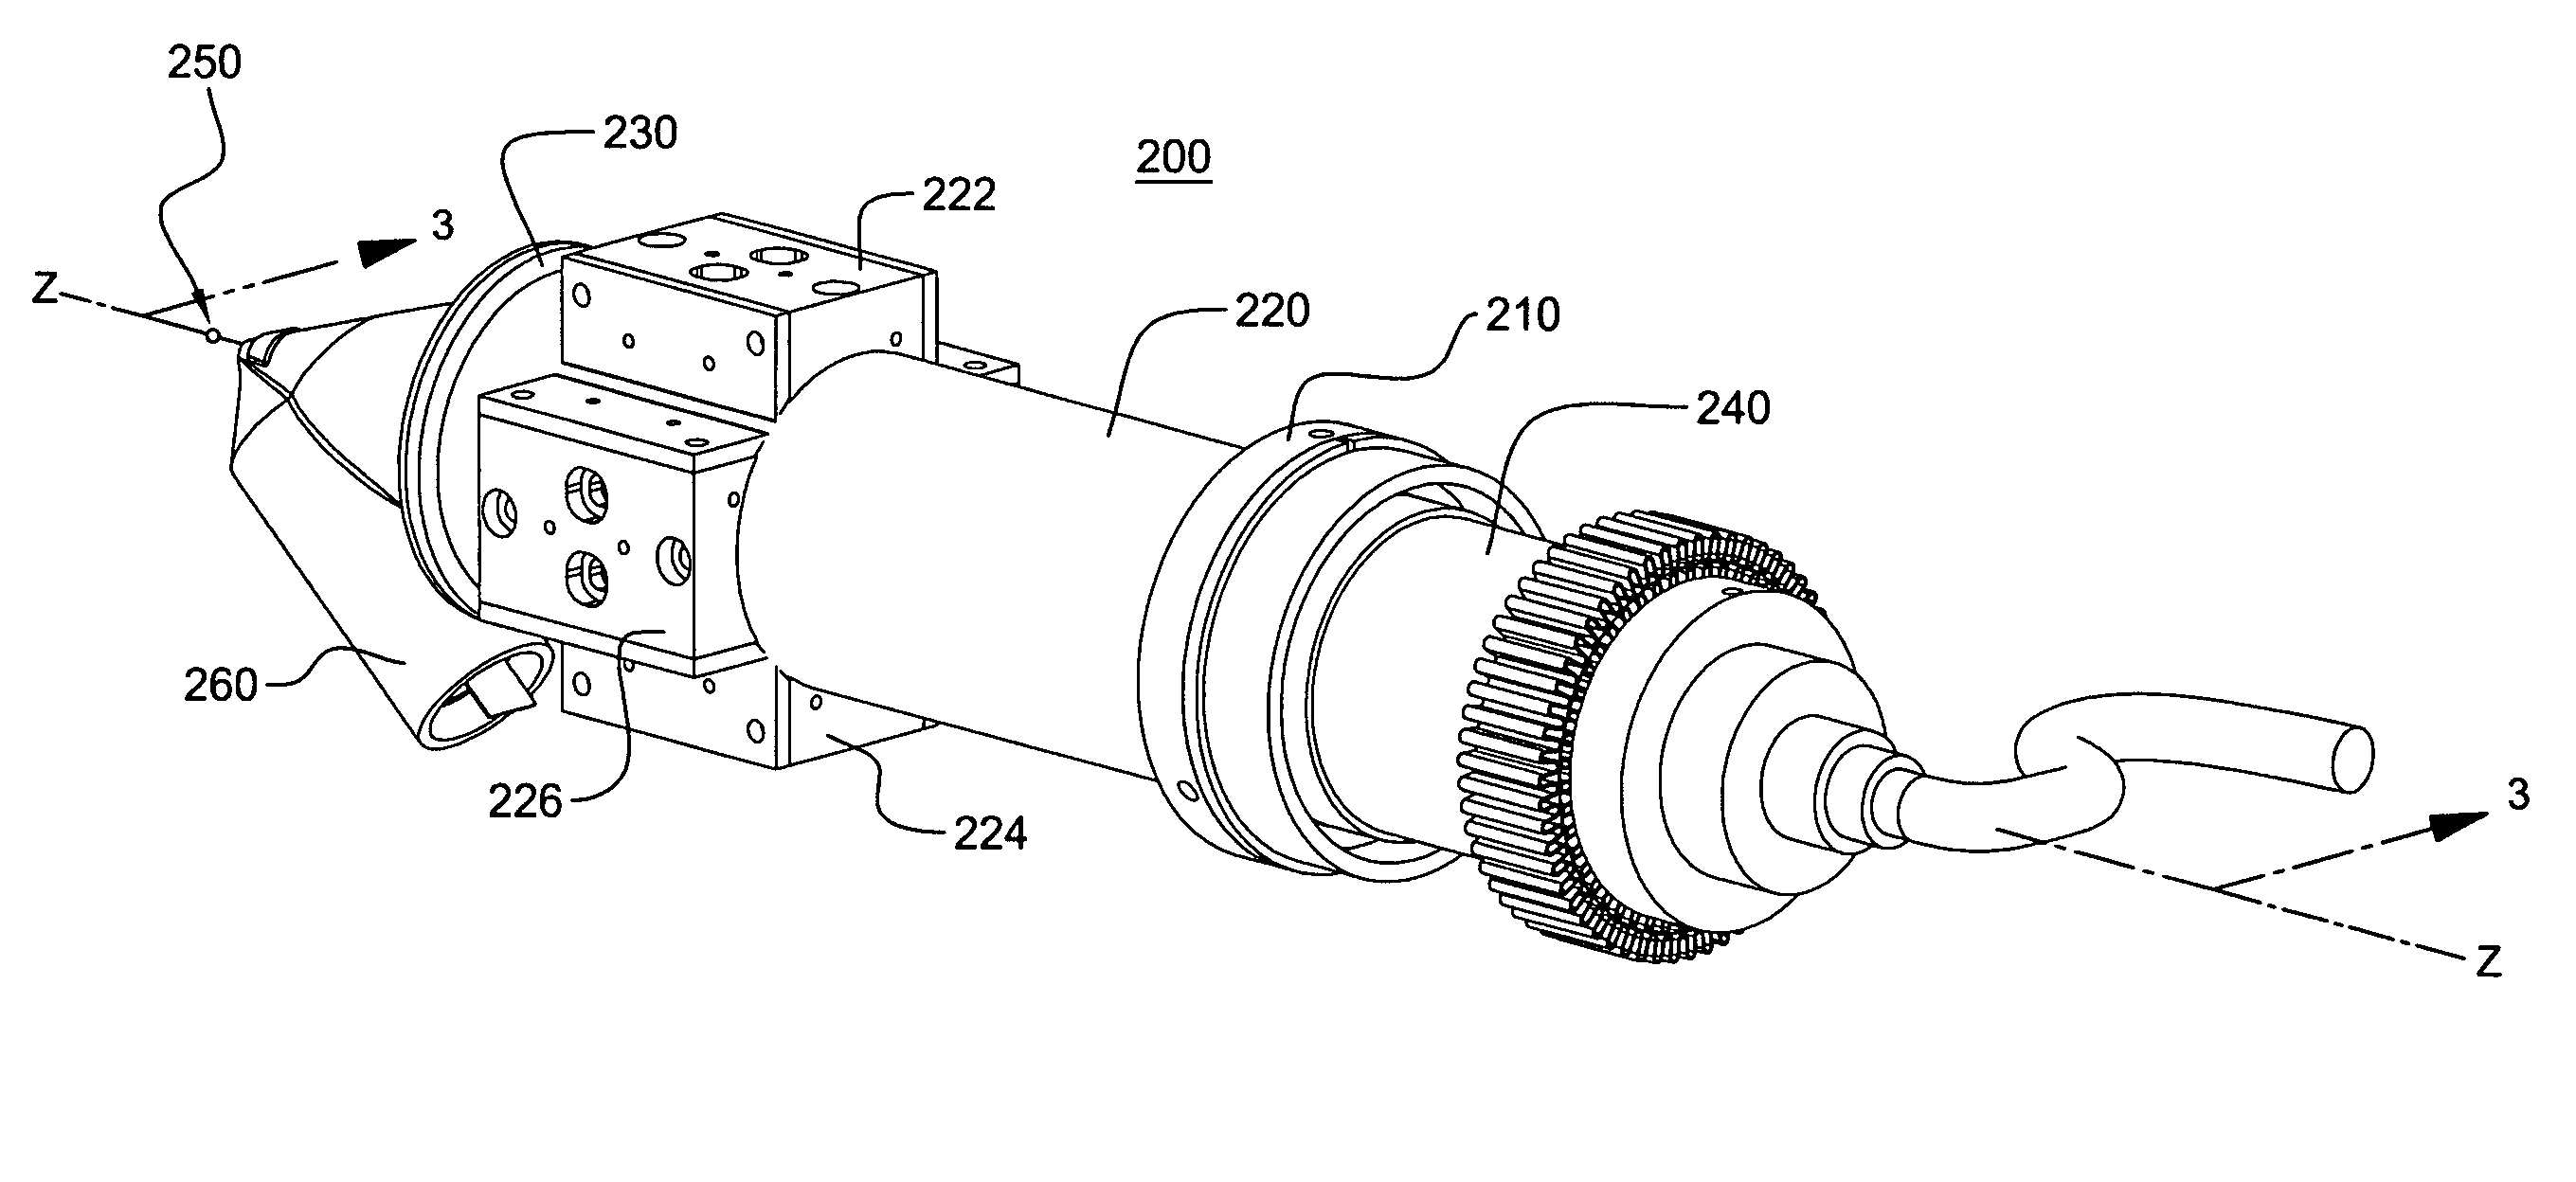 Highly aligned x-ray optic and source assembly for precision x-ray analysis applications